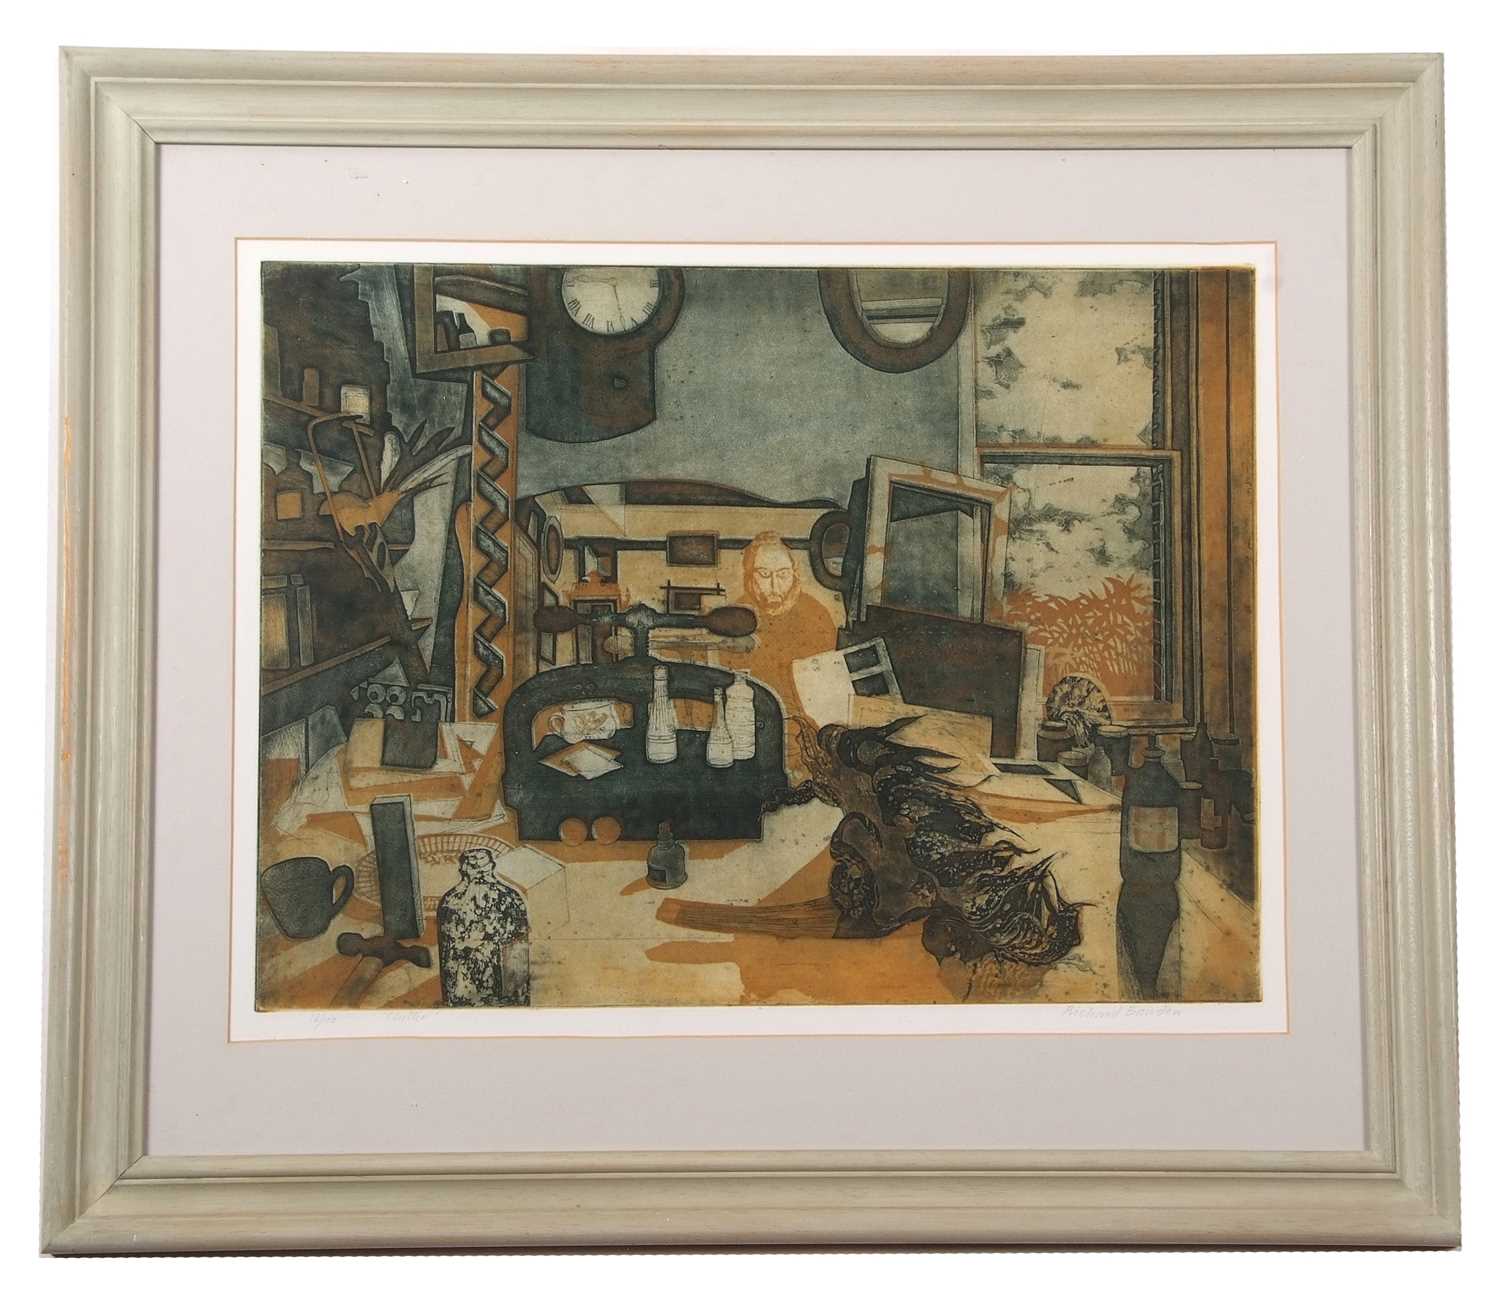 Richard Bawden (British, b.1936), 'Clutter', etching with aquatint, dated 1976, numbered 16/100, - Image 2 of 3